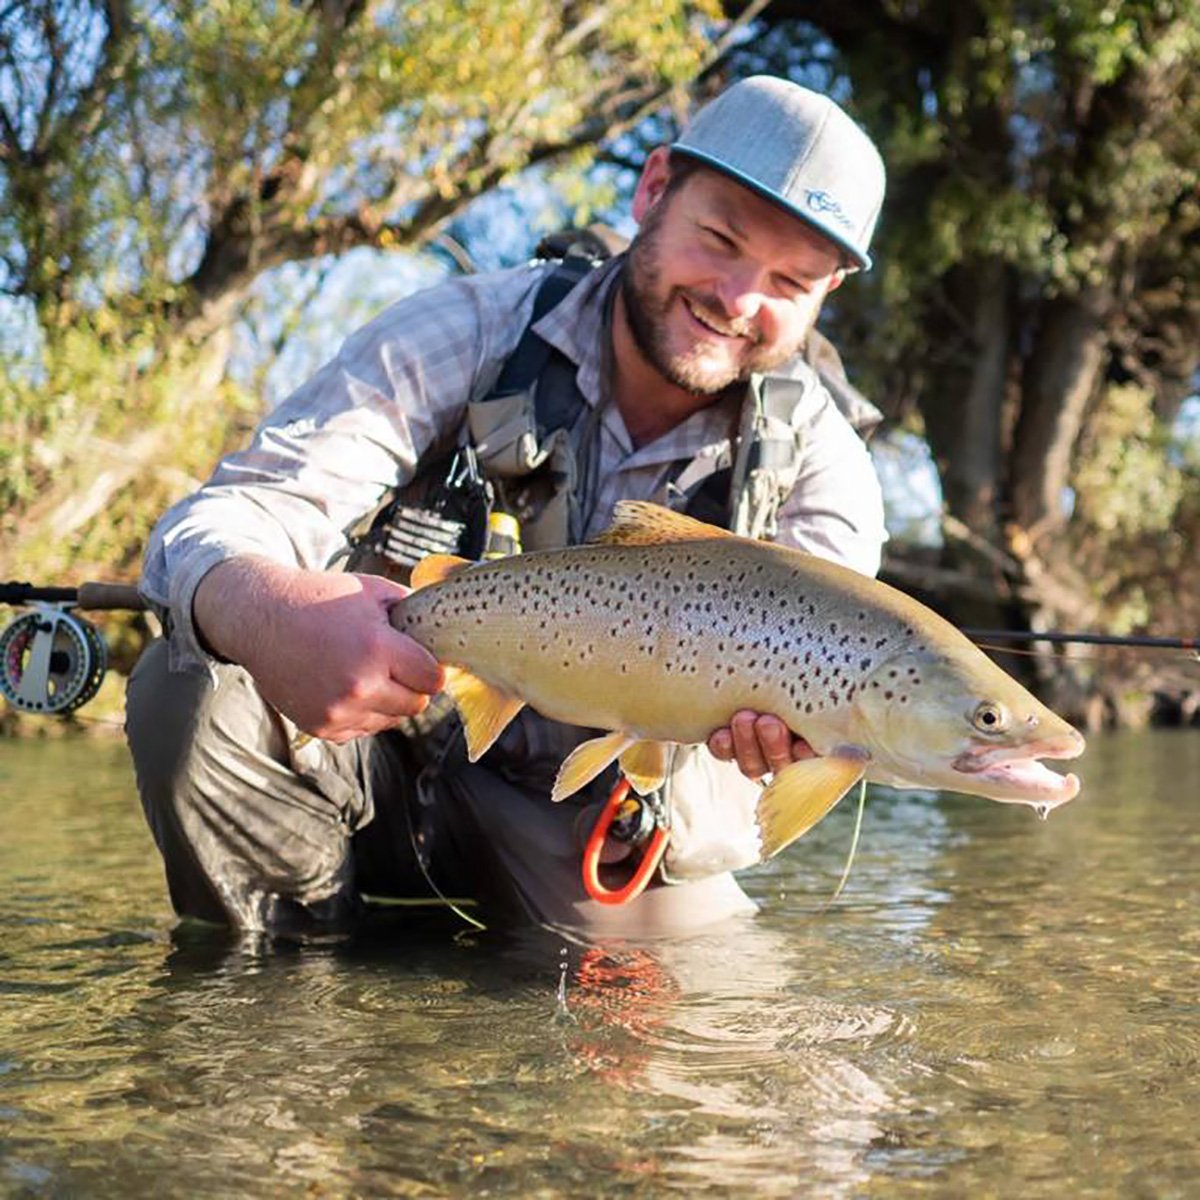 Wilderness fly fishing guides Melbourne Victoria Australia — Wilderness Fly  Fishing